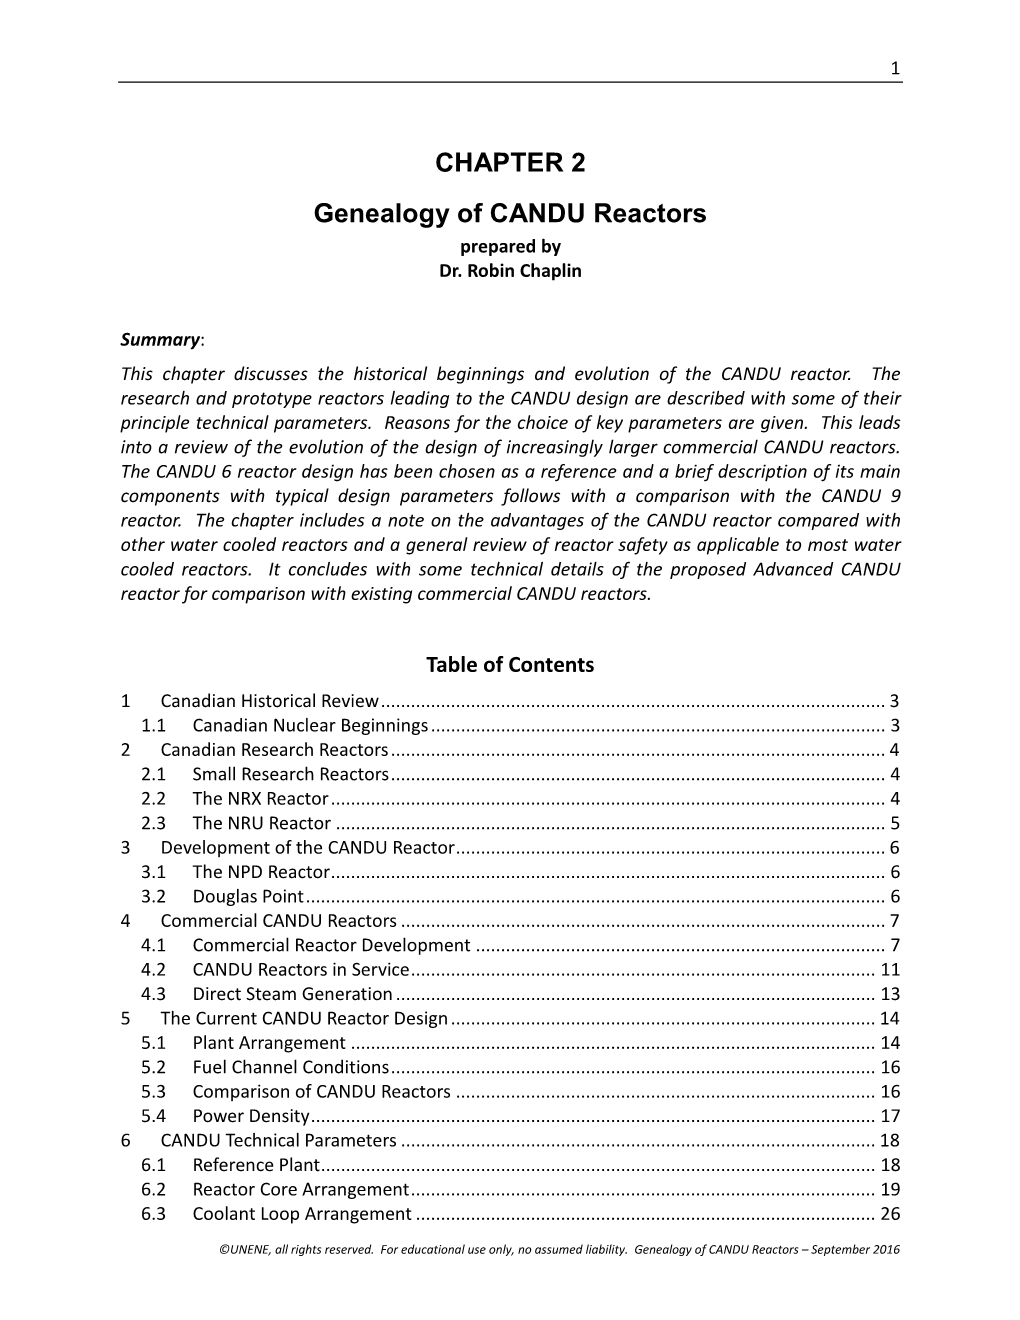 CHAPTER 2 Genealogy of CANDU Reactors Prepared by Dr